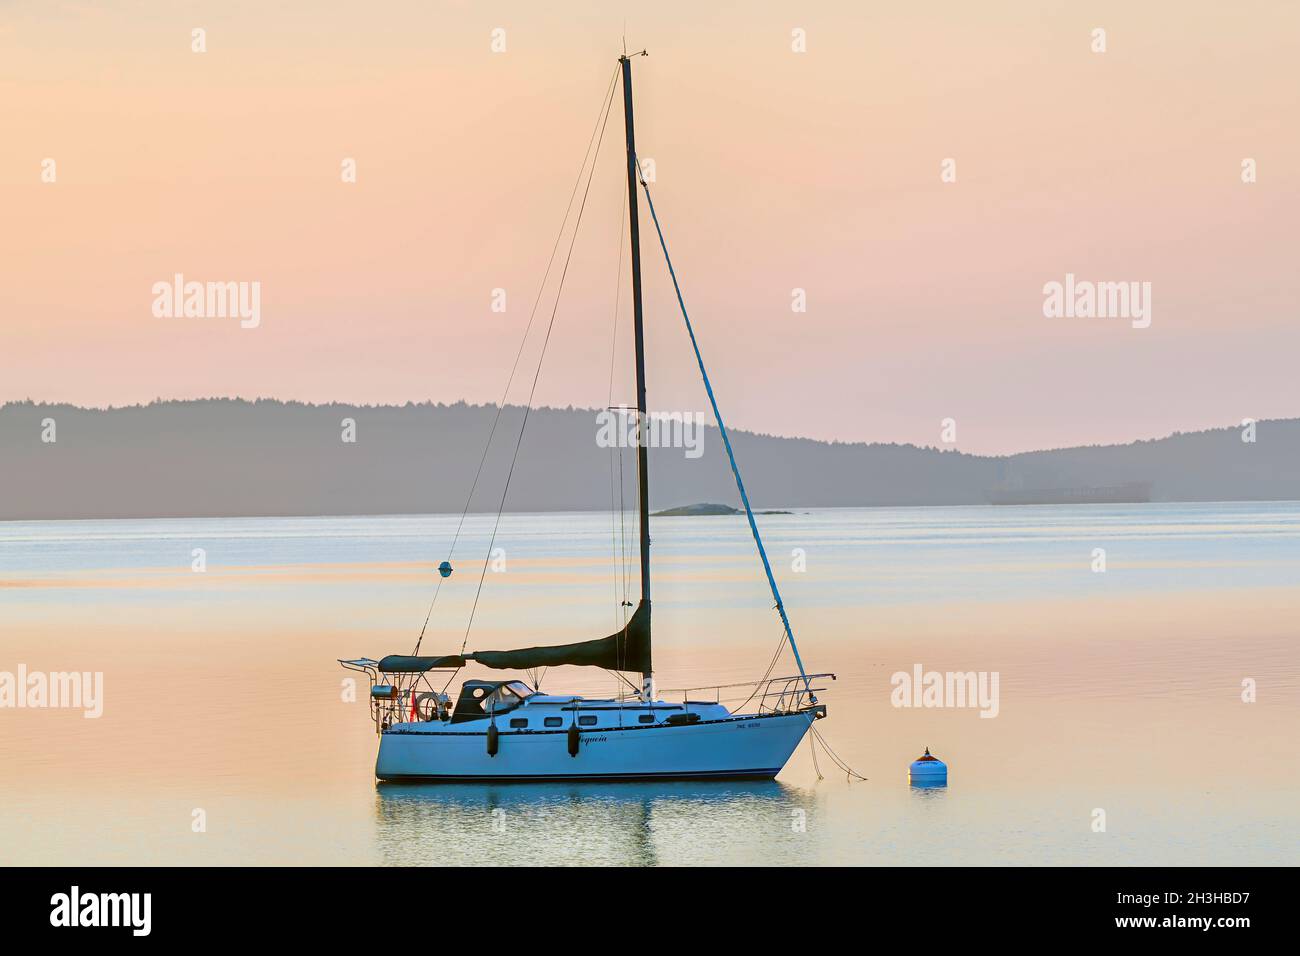 A sail boat moored in the calm water of a secluded bay in the early morning light on Vancouver Island British Columbia Canada. Stock Photo